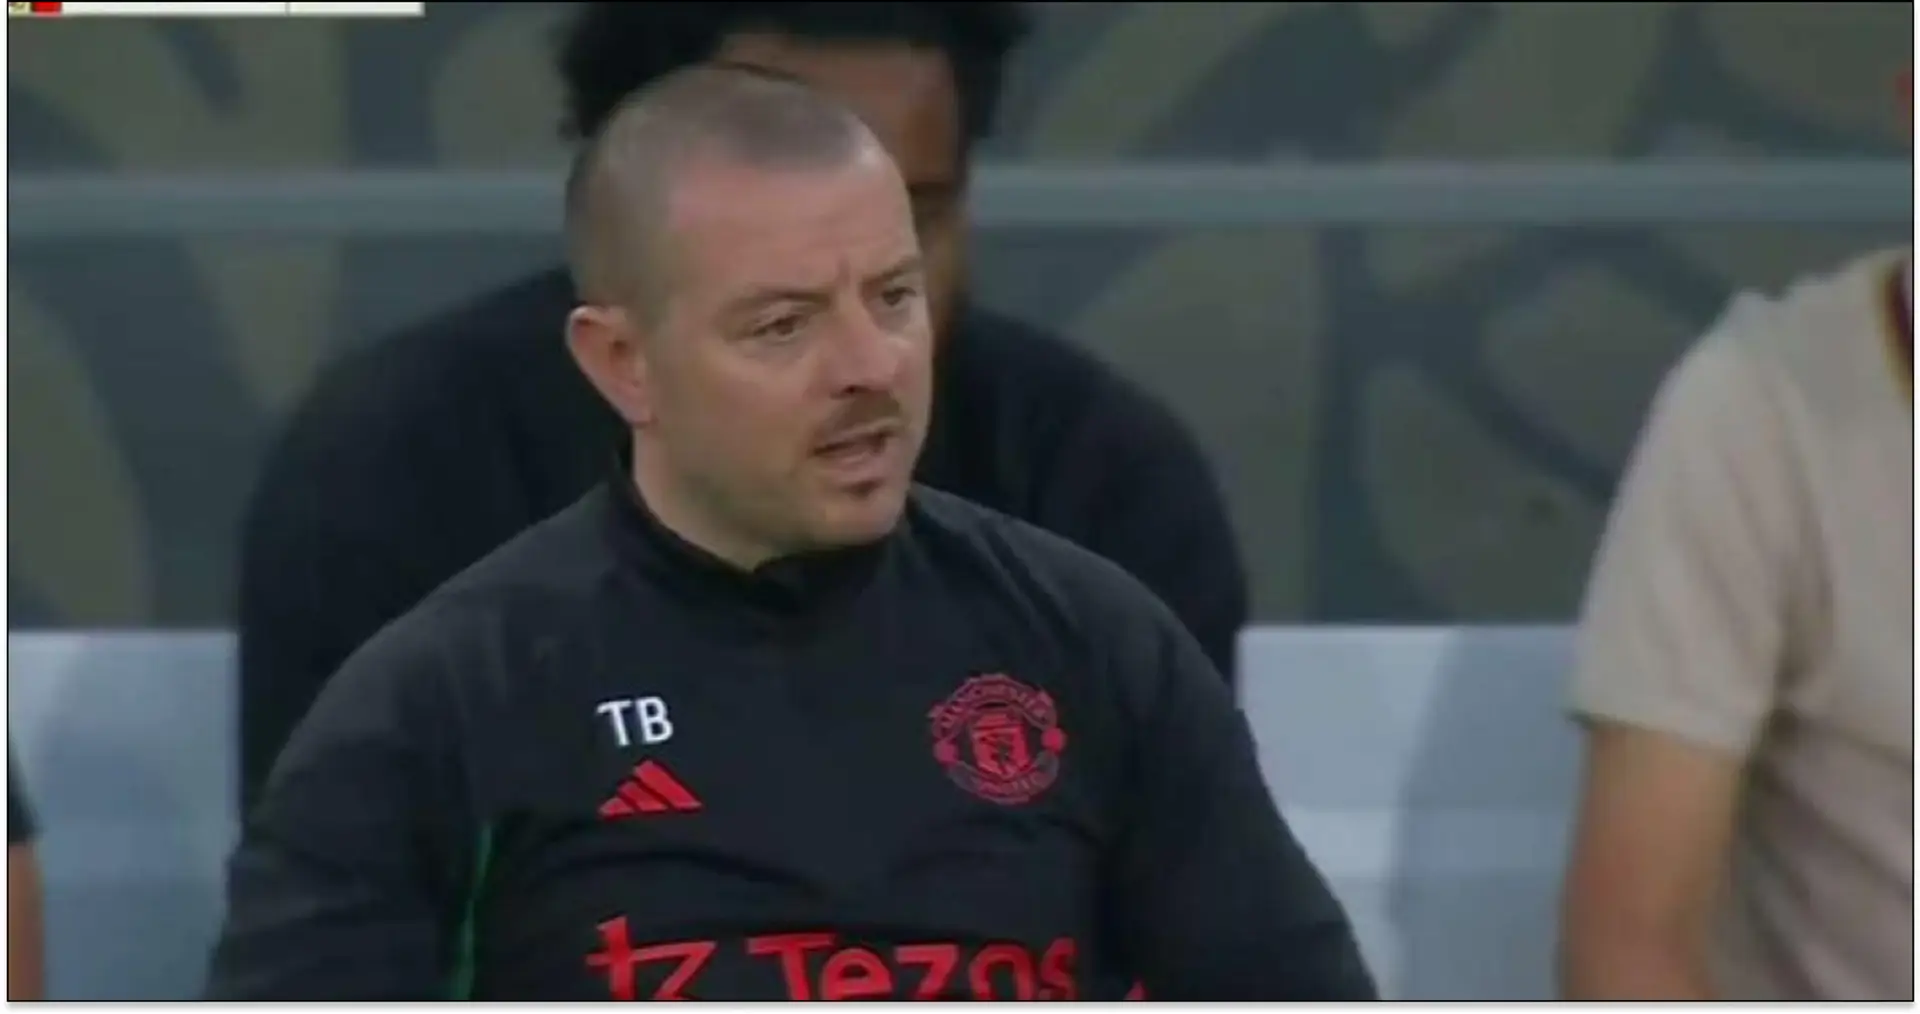 Who is United coach camera zoomed in on all the time during Wrexham game? Answered